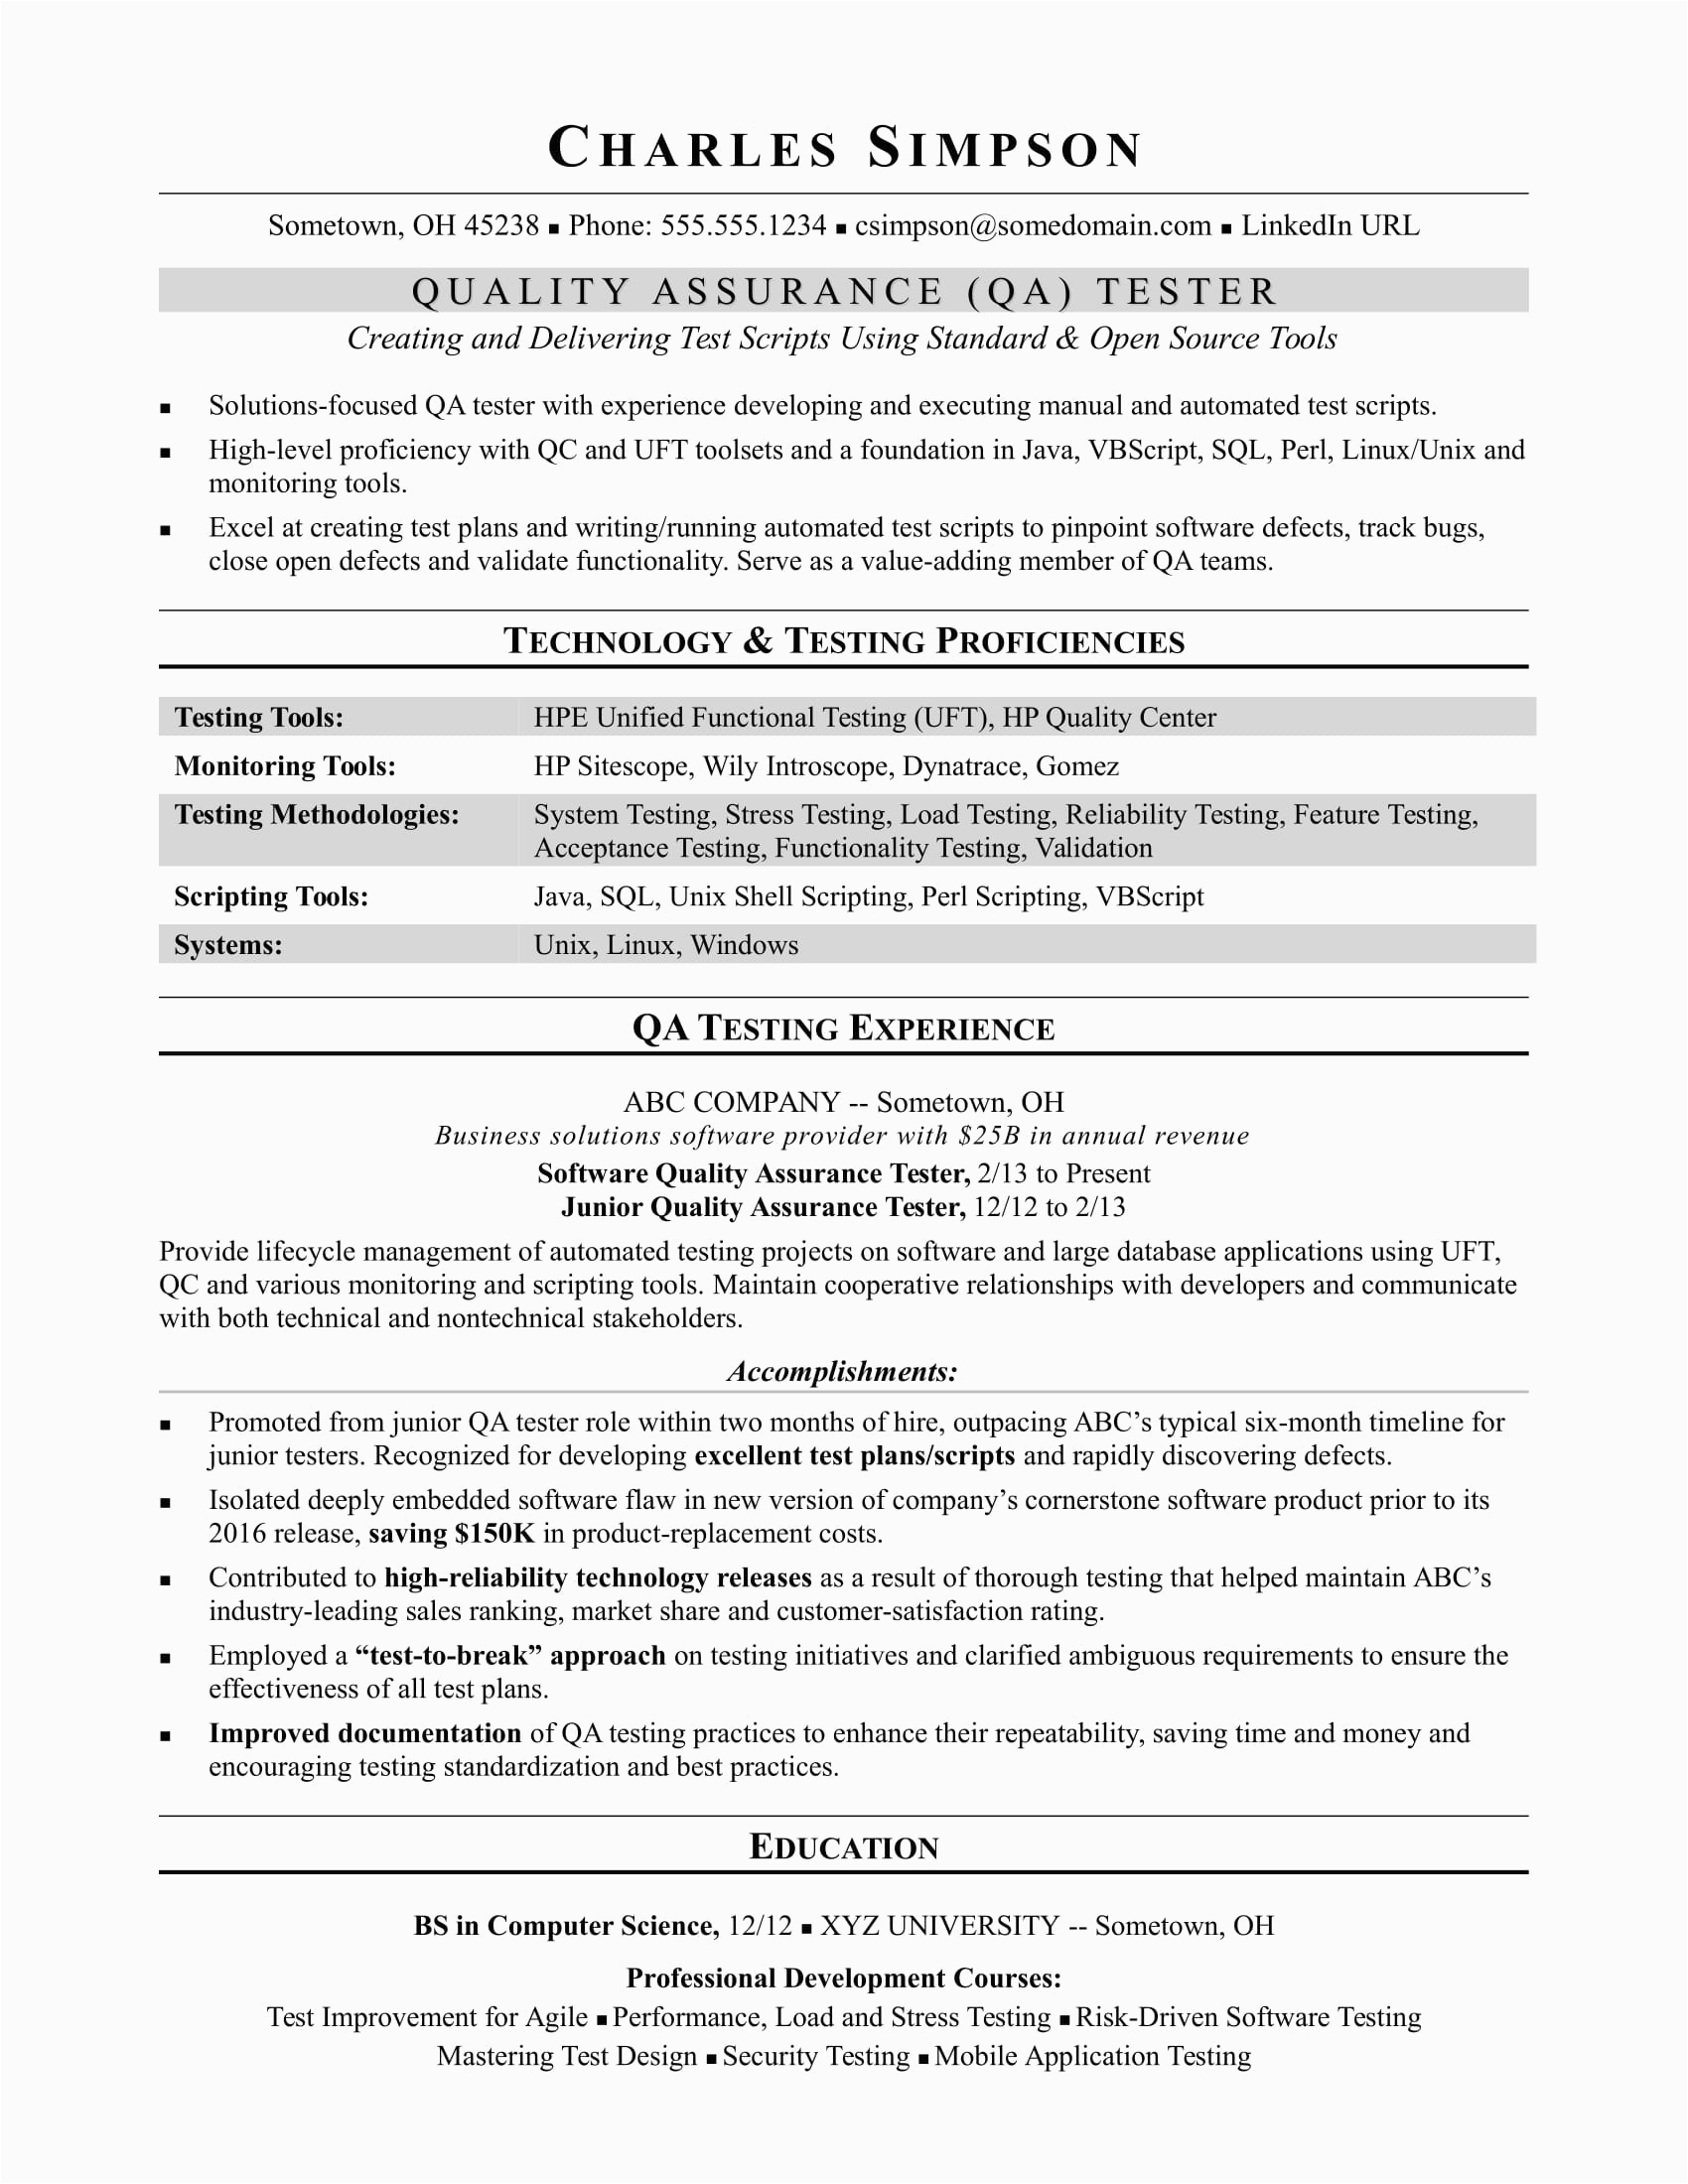 Resume Template for Experienced software Tester Qa Developer Resume March 2021